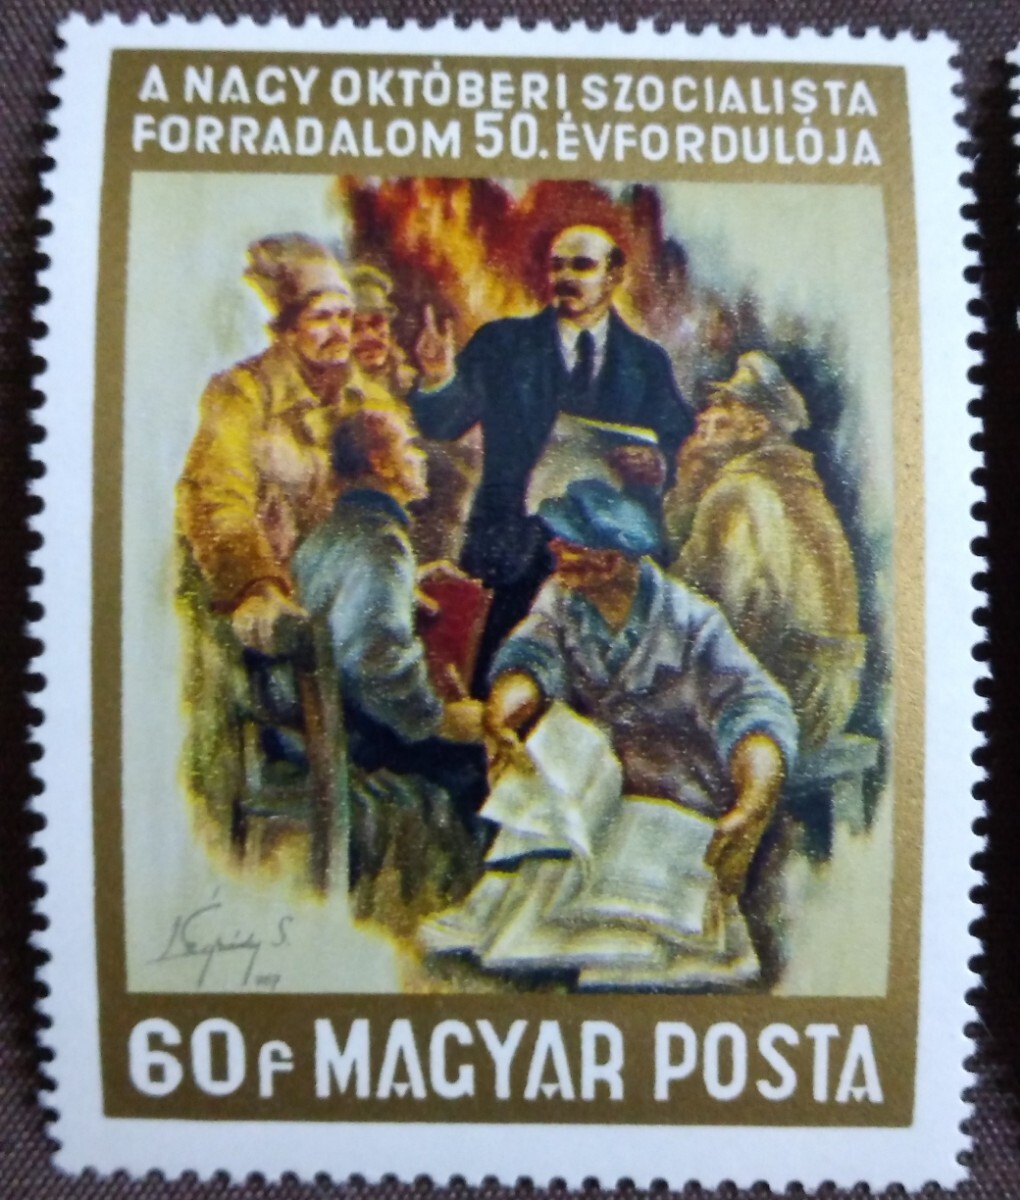  Hungary 1967so ream 9 month revolution 50 year picture fine art re- person unused glue equipped 